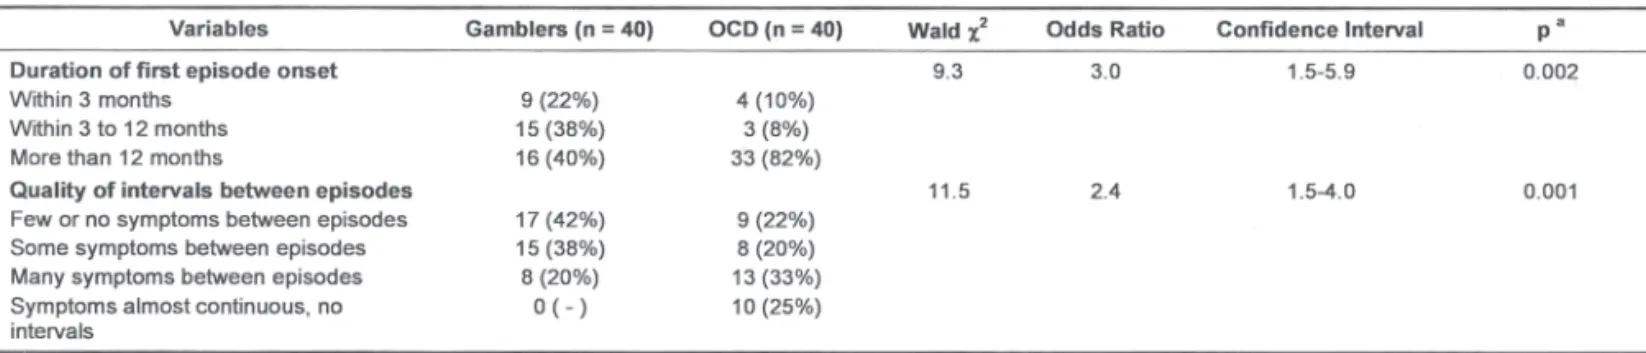 Table 5  shows the temperament sub-factors that efficiently discriminated gamblers or OCD patients from the healthy volunteers